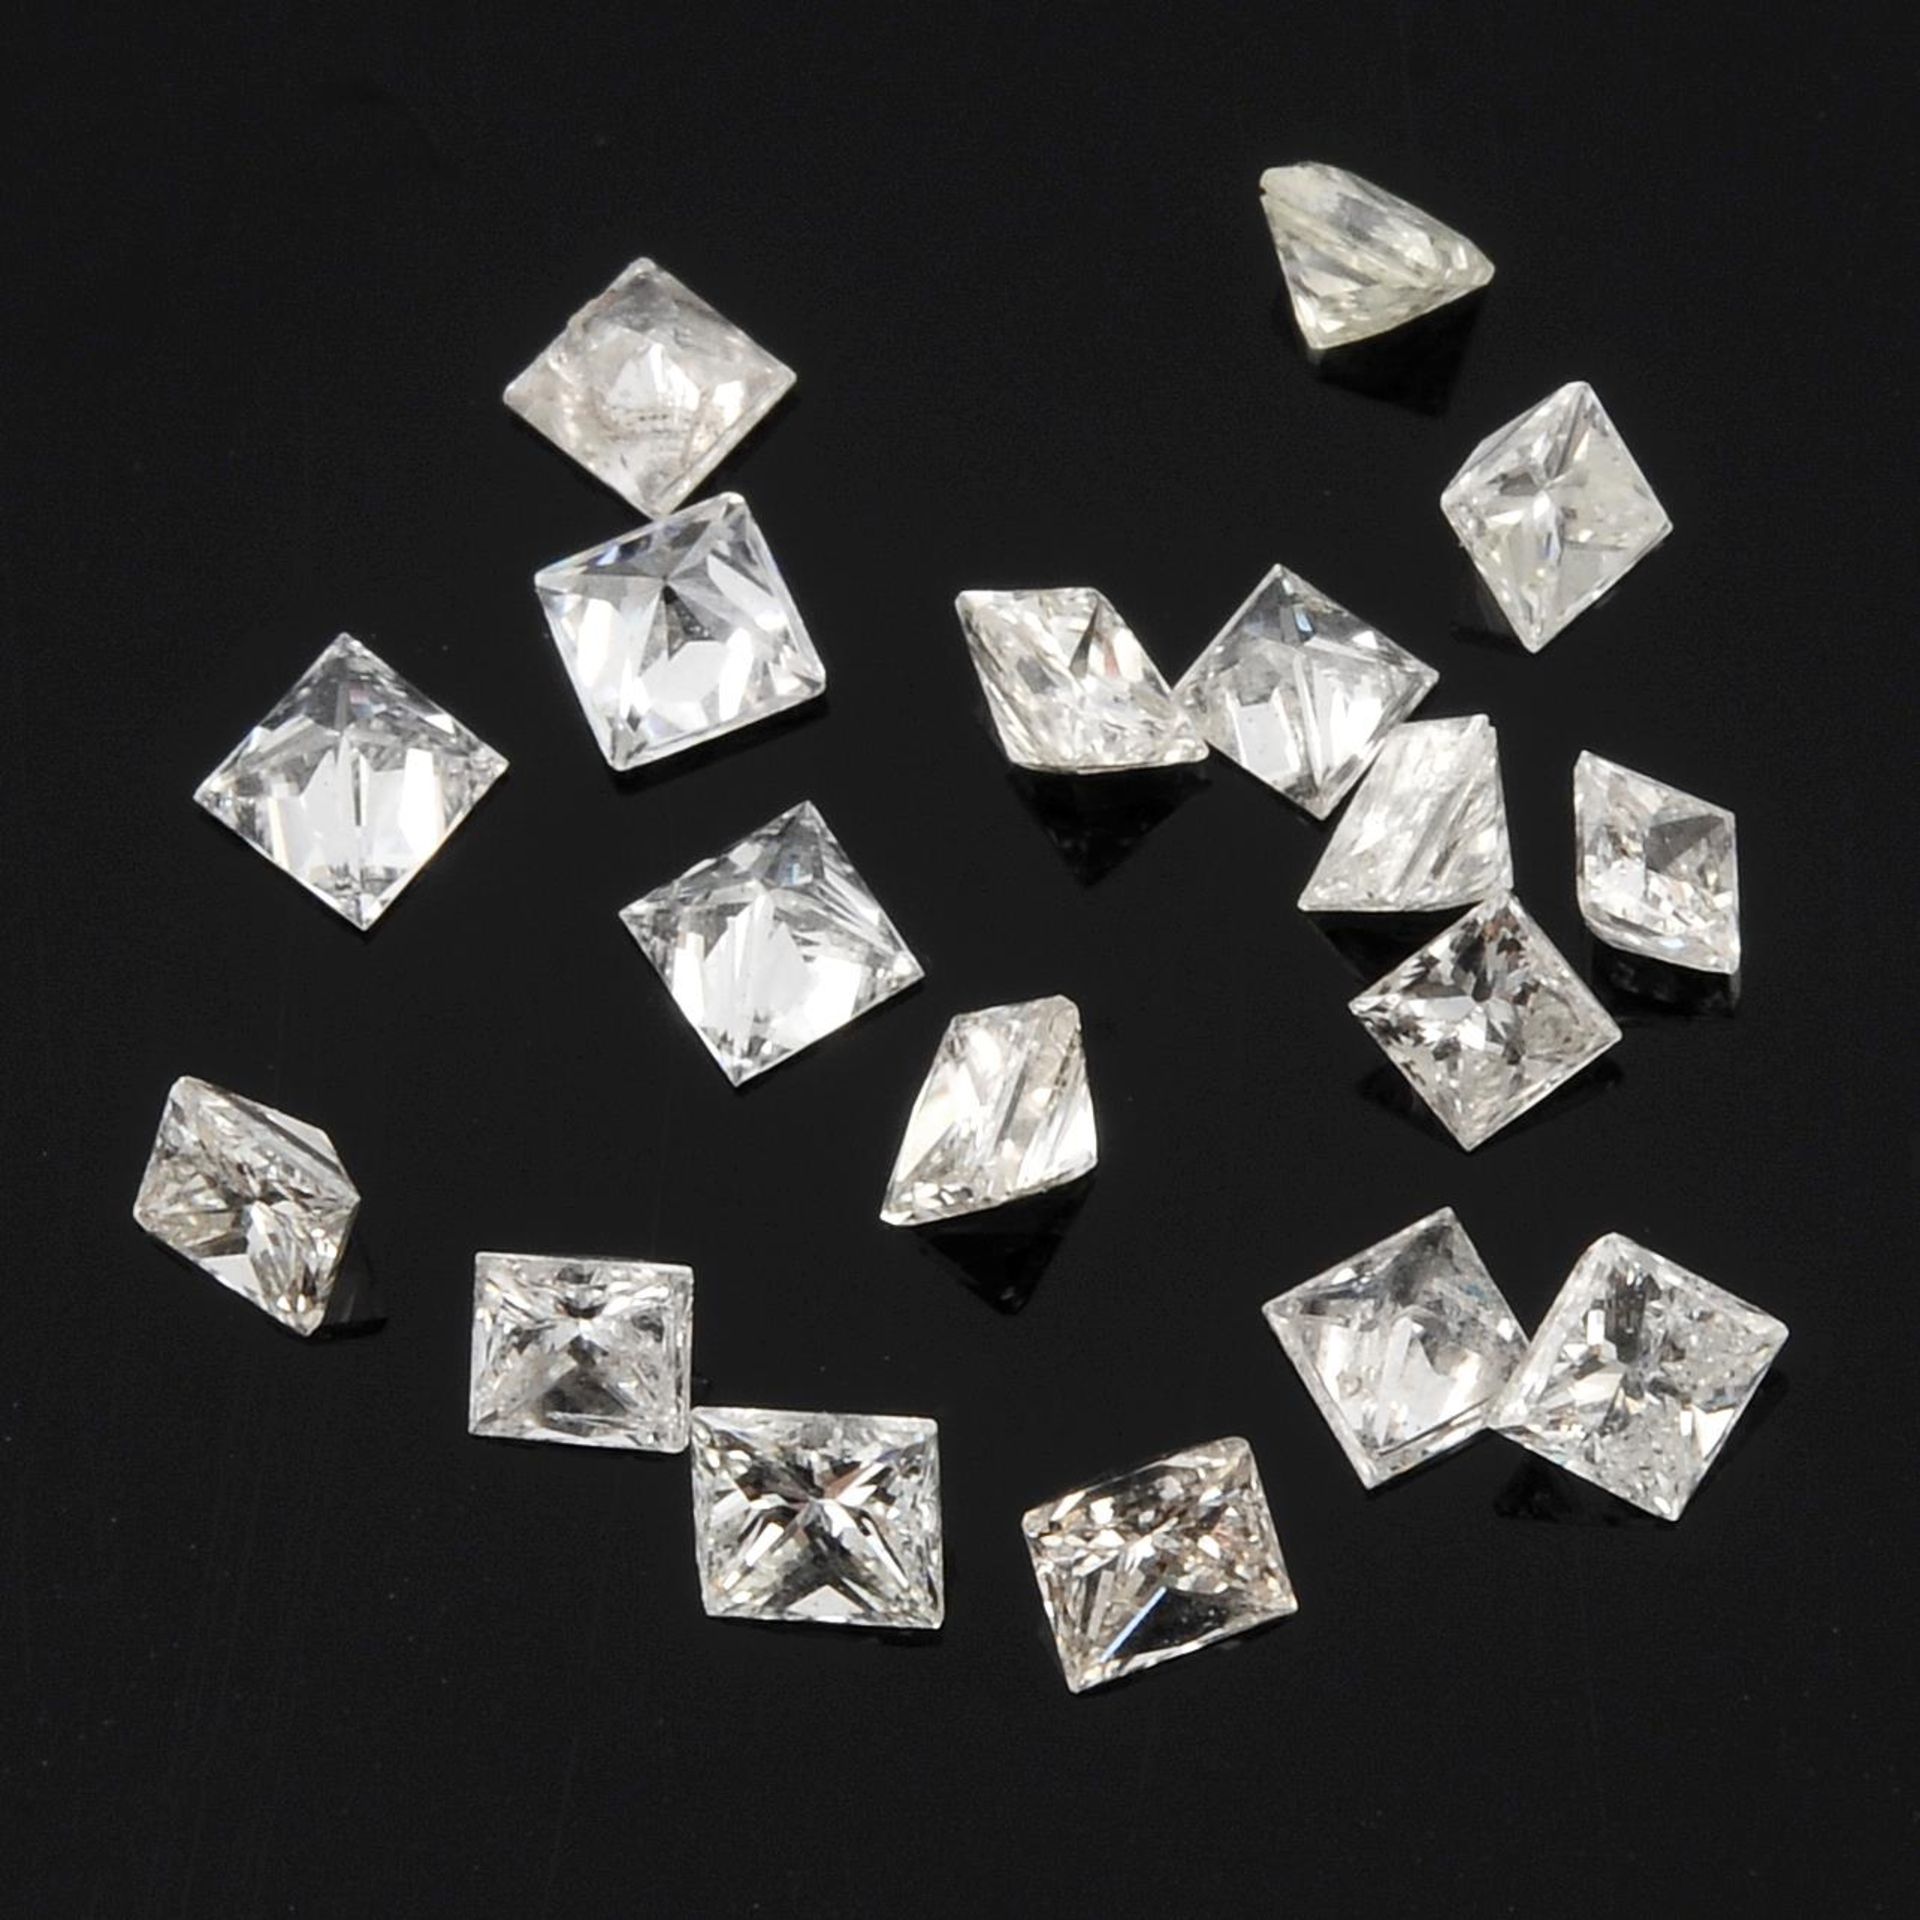 Selection of square shape diamonds, weighing 1.45ct.